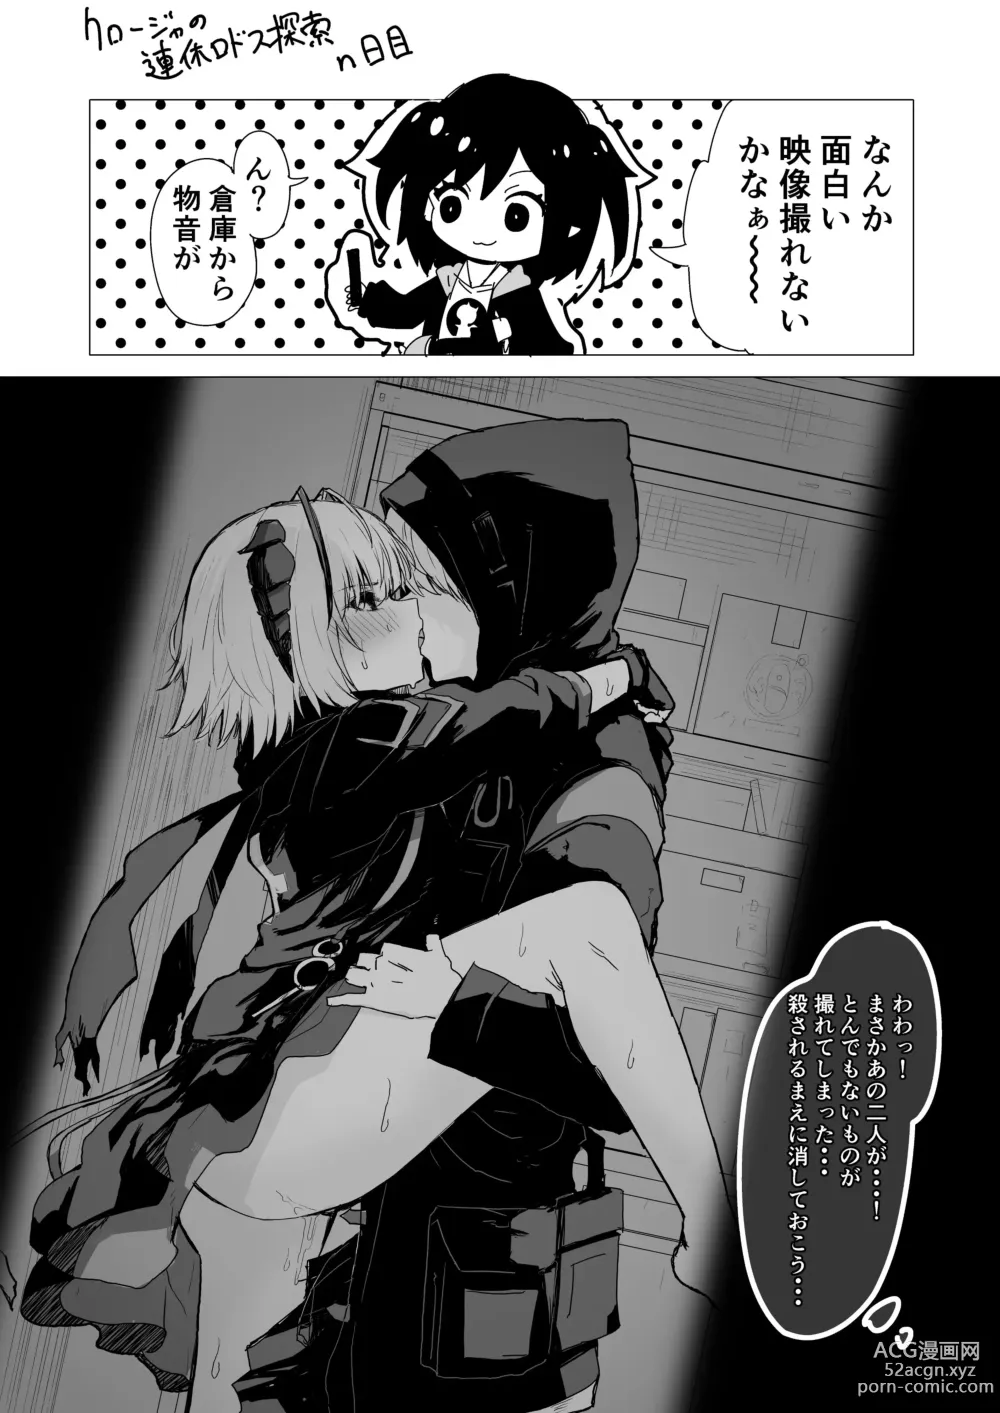 Page 5 of doujinshi Twitter collection